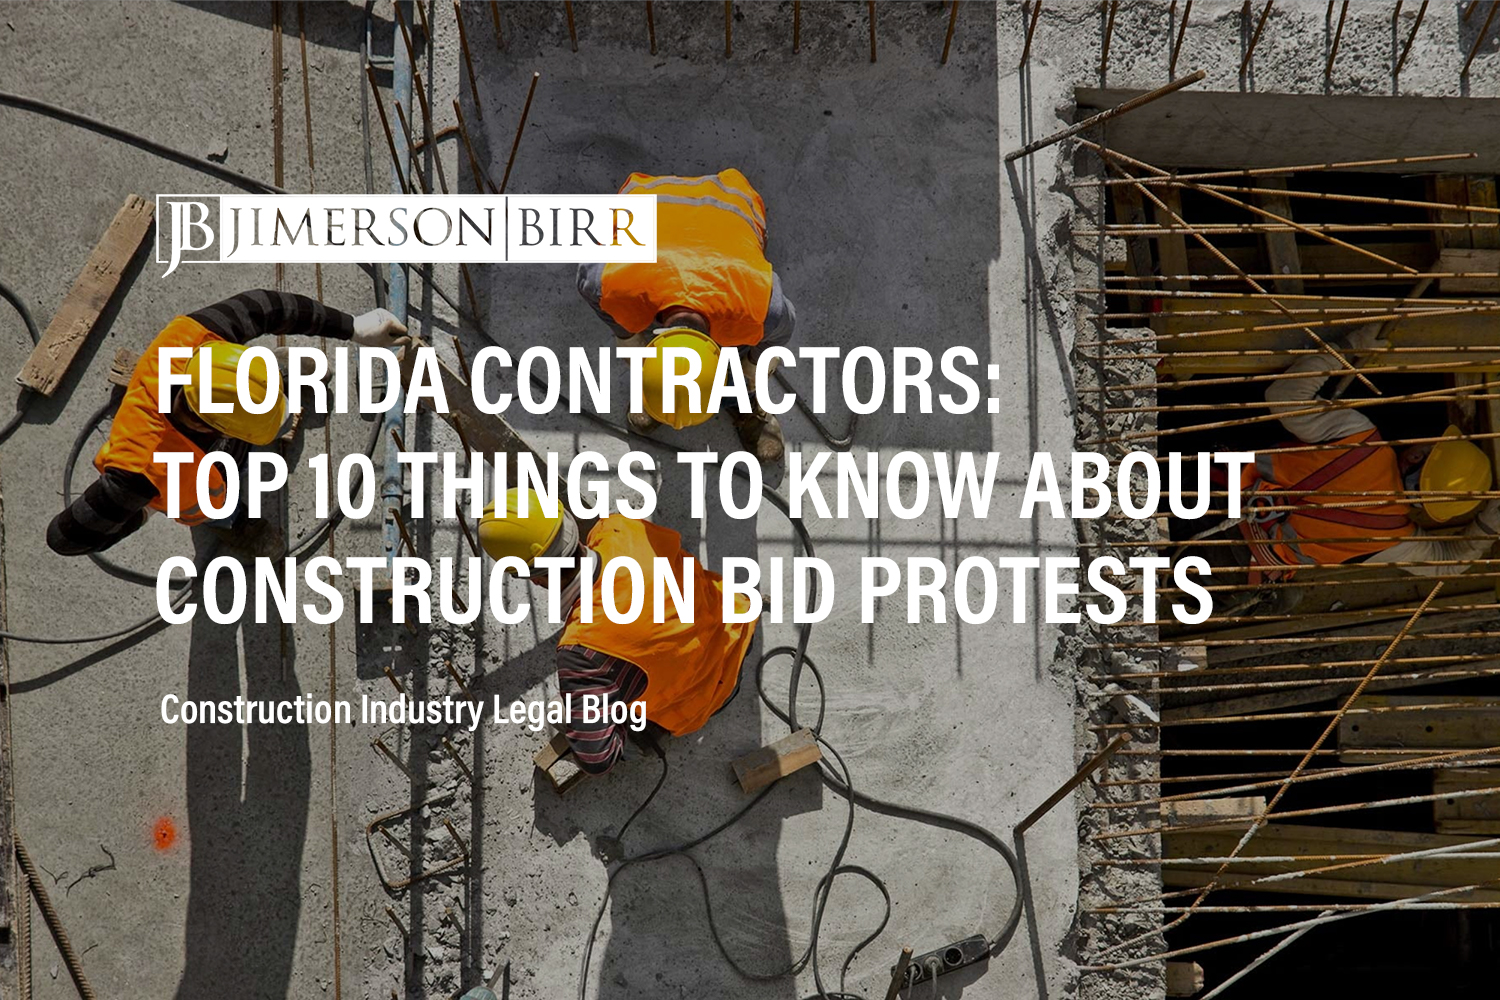 Construction Bid Protests in Florida: Top 10 Things Contractors Should Know